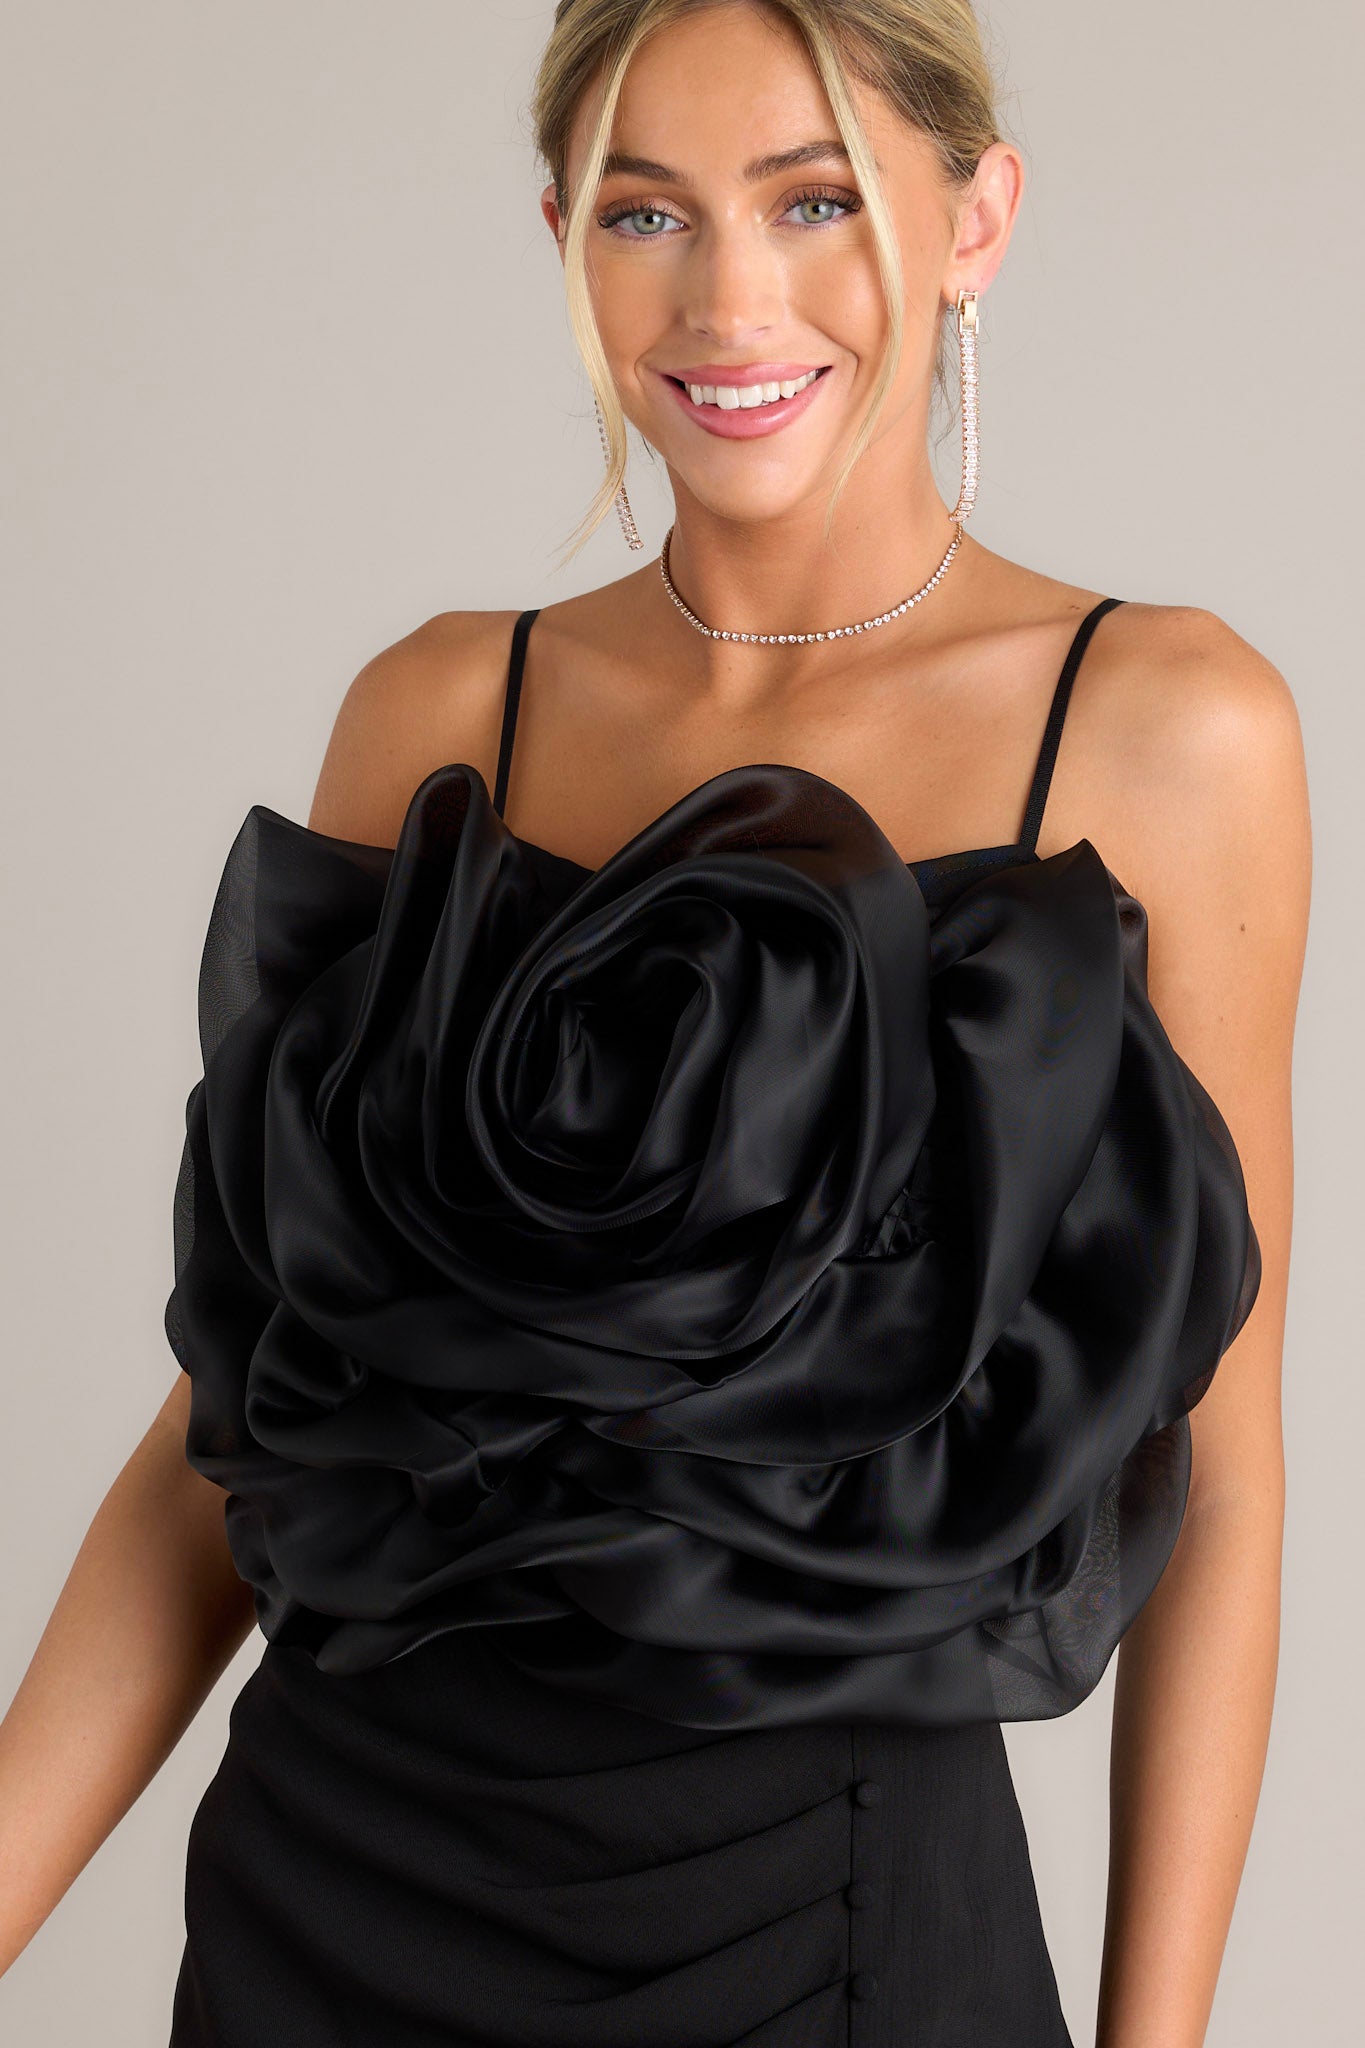 This black crop top features a square neckline, thin & stretchy adjustable straps, a fully smocked back, a large 3-D flower, and a cropped hemline.